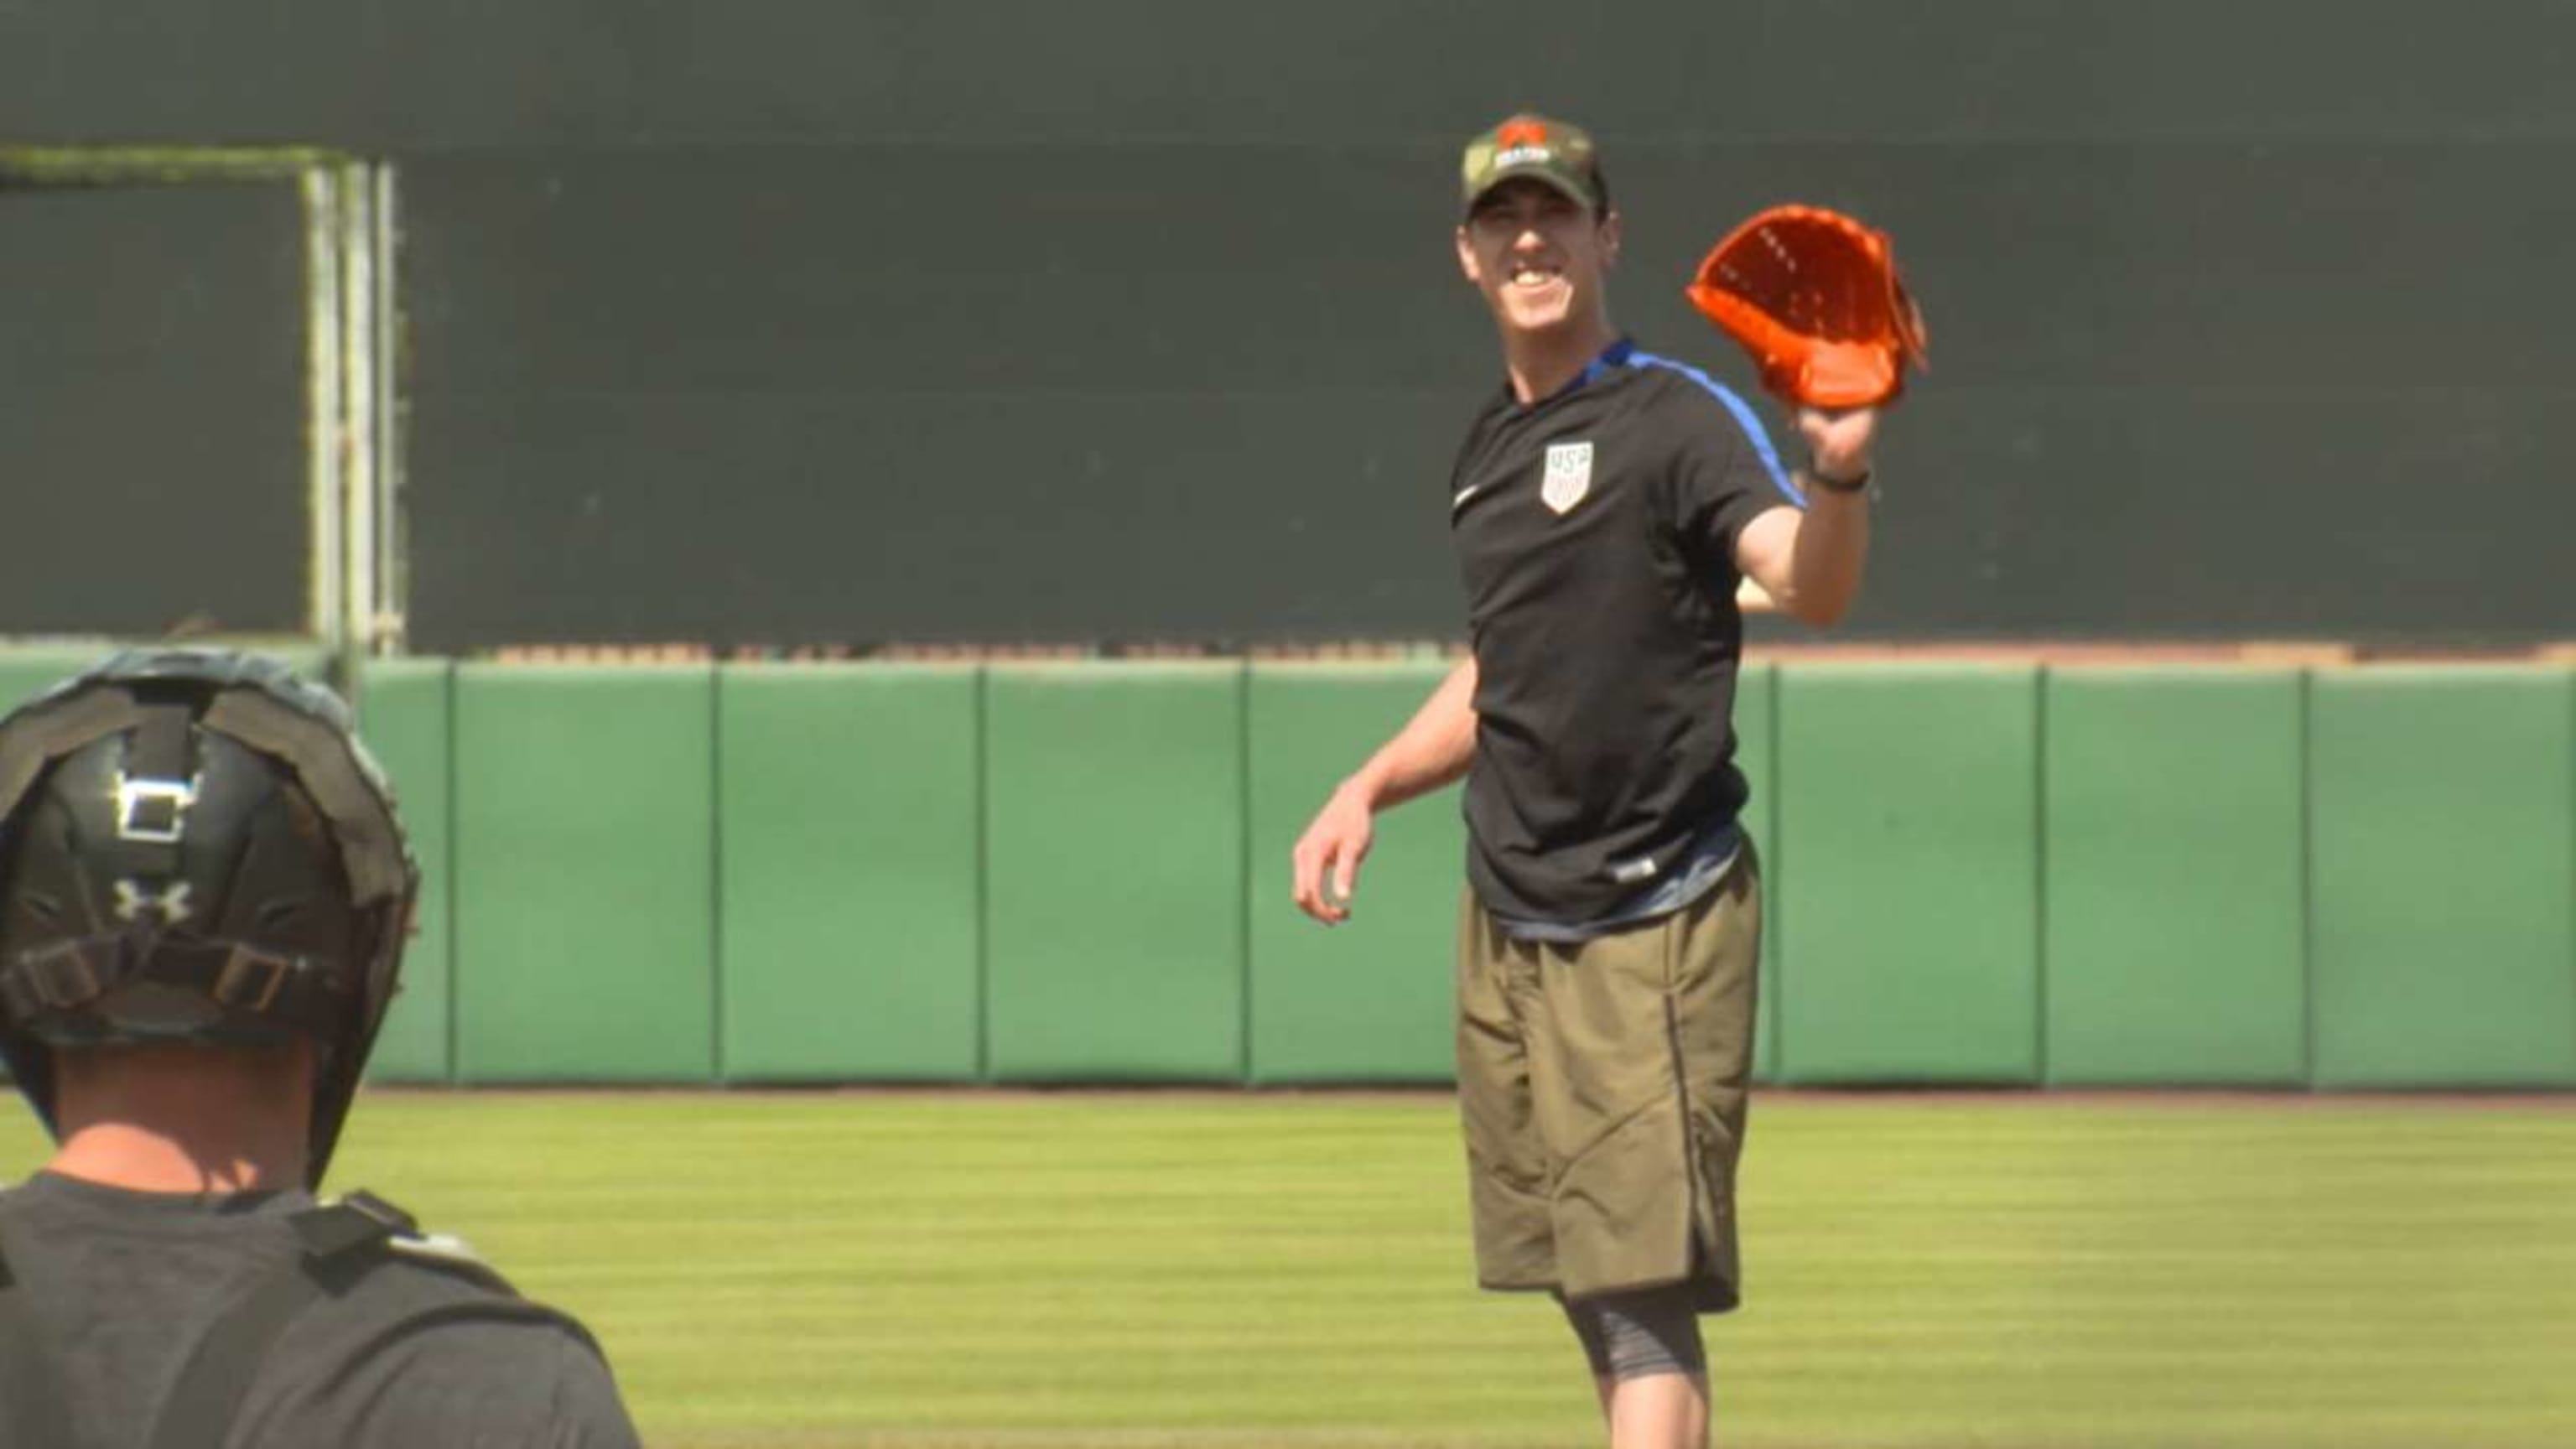 New-look Lincecum ready for a comeback